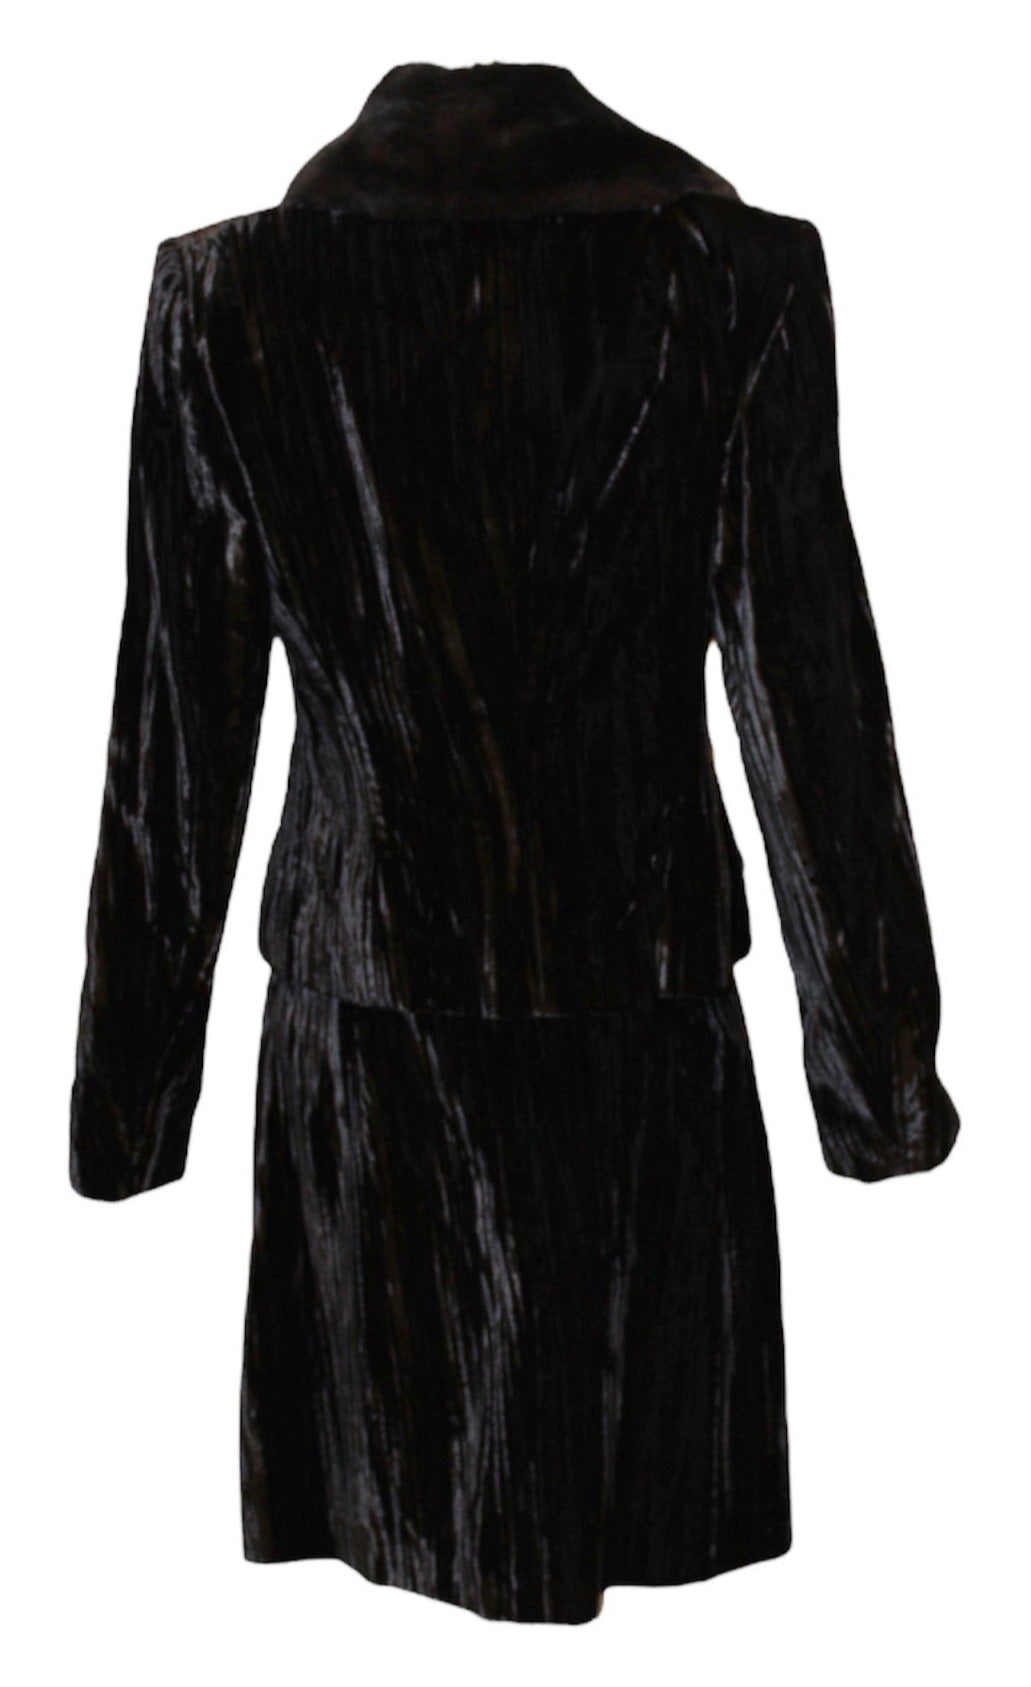  Dolce and Gabbana 90s Black Velvet Skirt Suit With Faux Fur Collar BACK 3 of 6